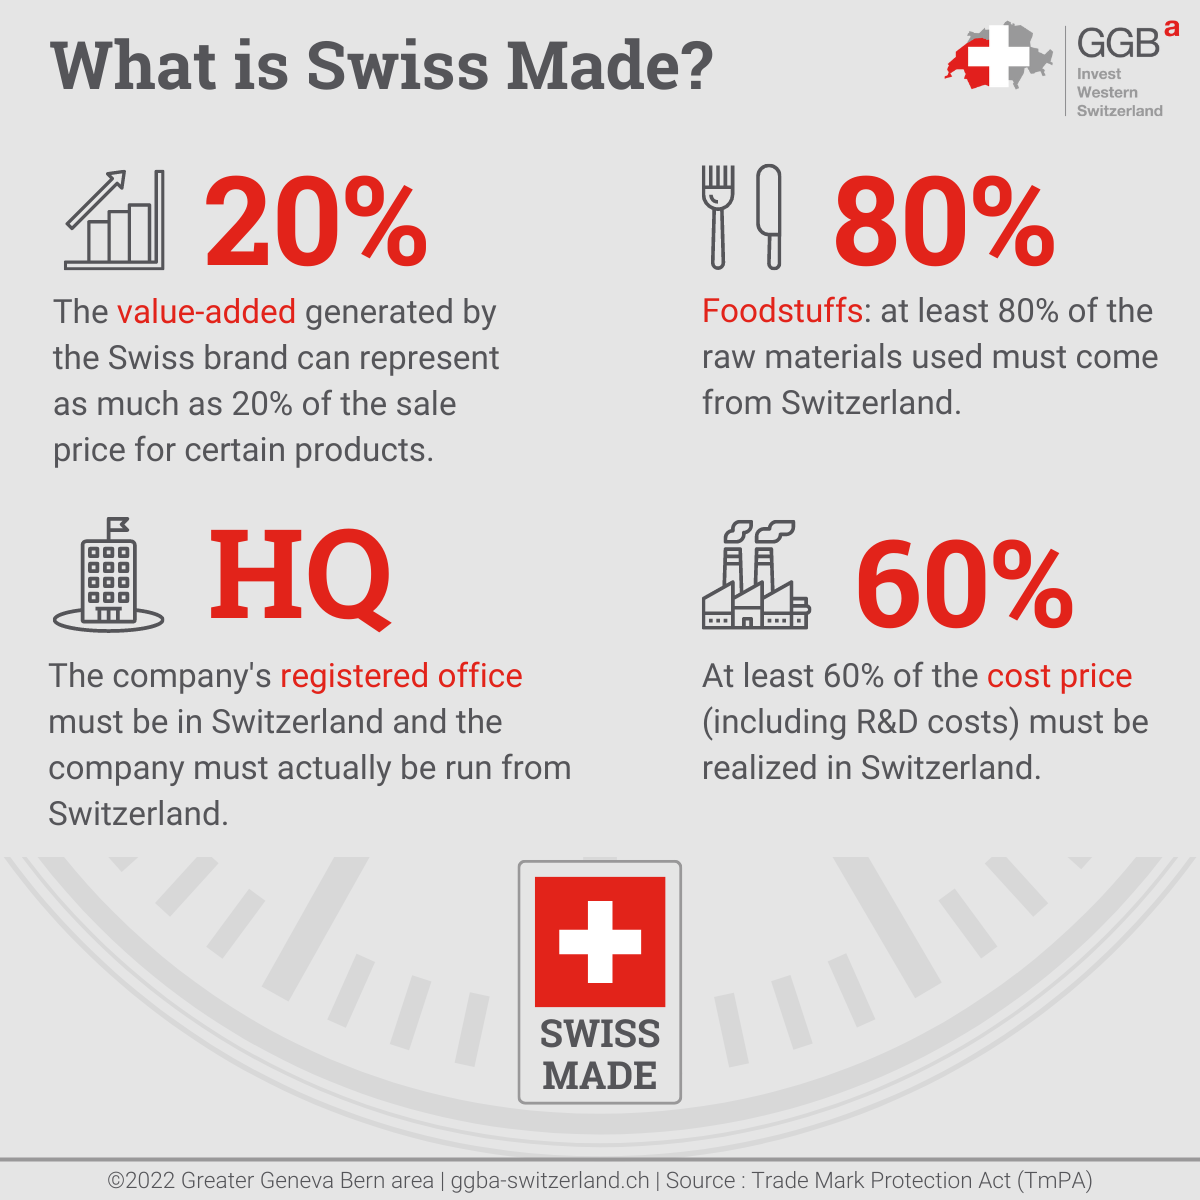 The Swiss made label, recognized as a guarantee of quality and know-how on the international market, is coveted by many companies. However, to qualify for this label, it is necessary to respect several criteria defined by Swiss legislation.